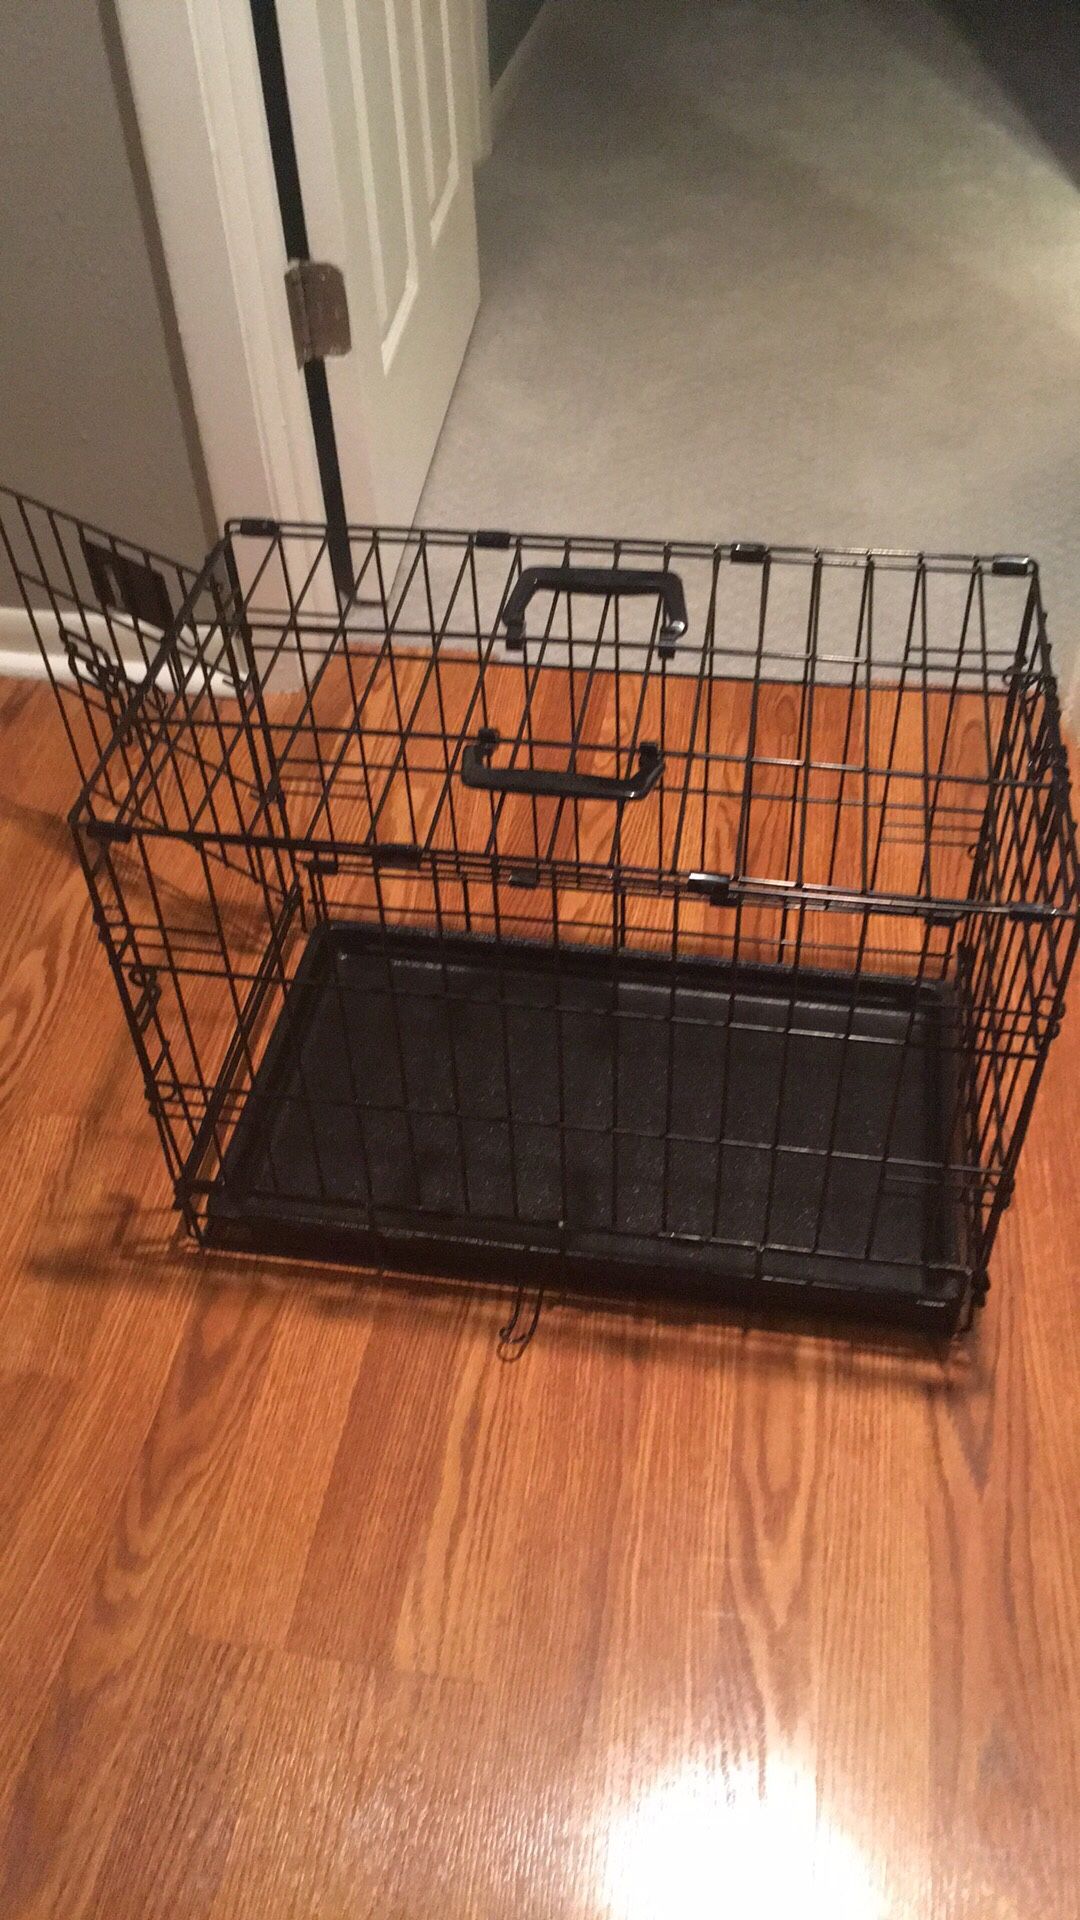 Small pets crate (16x22x13)